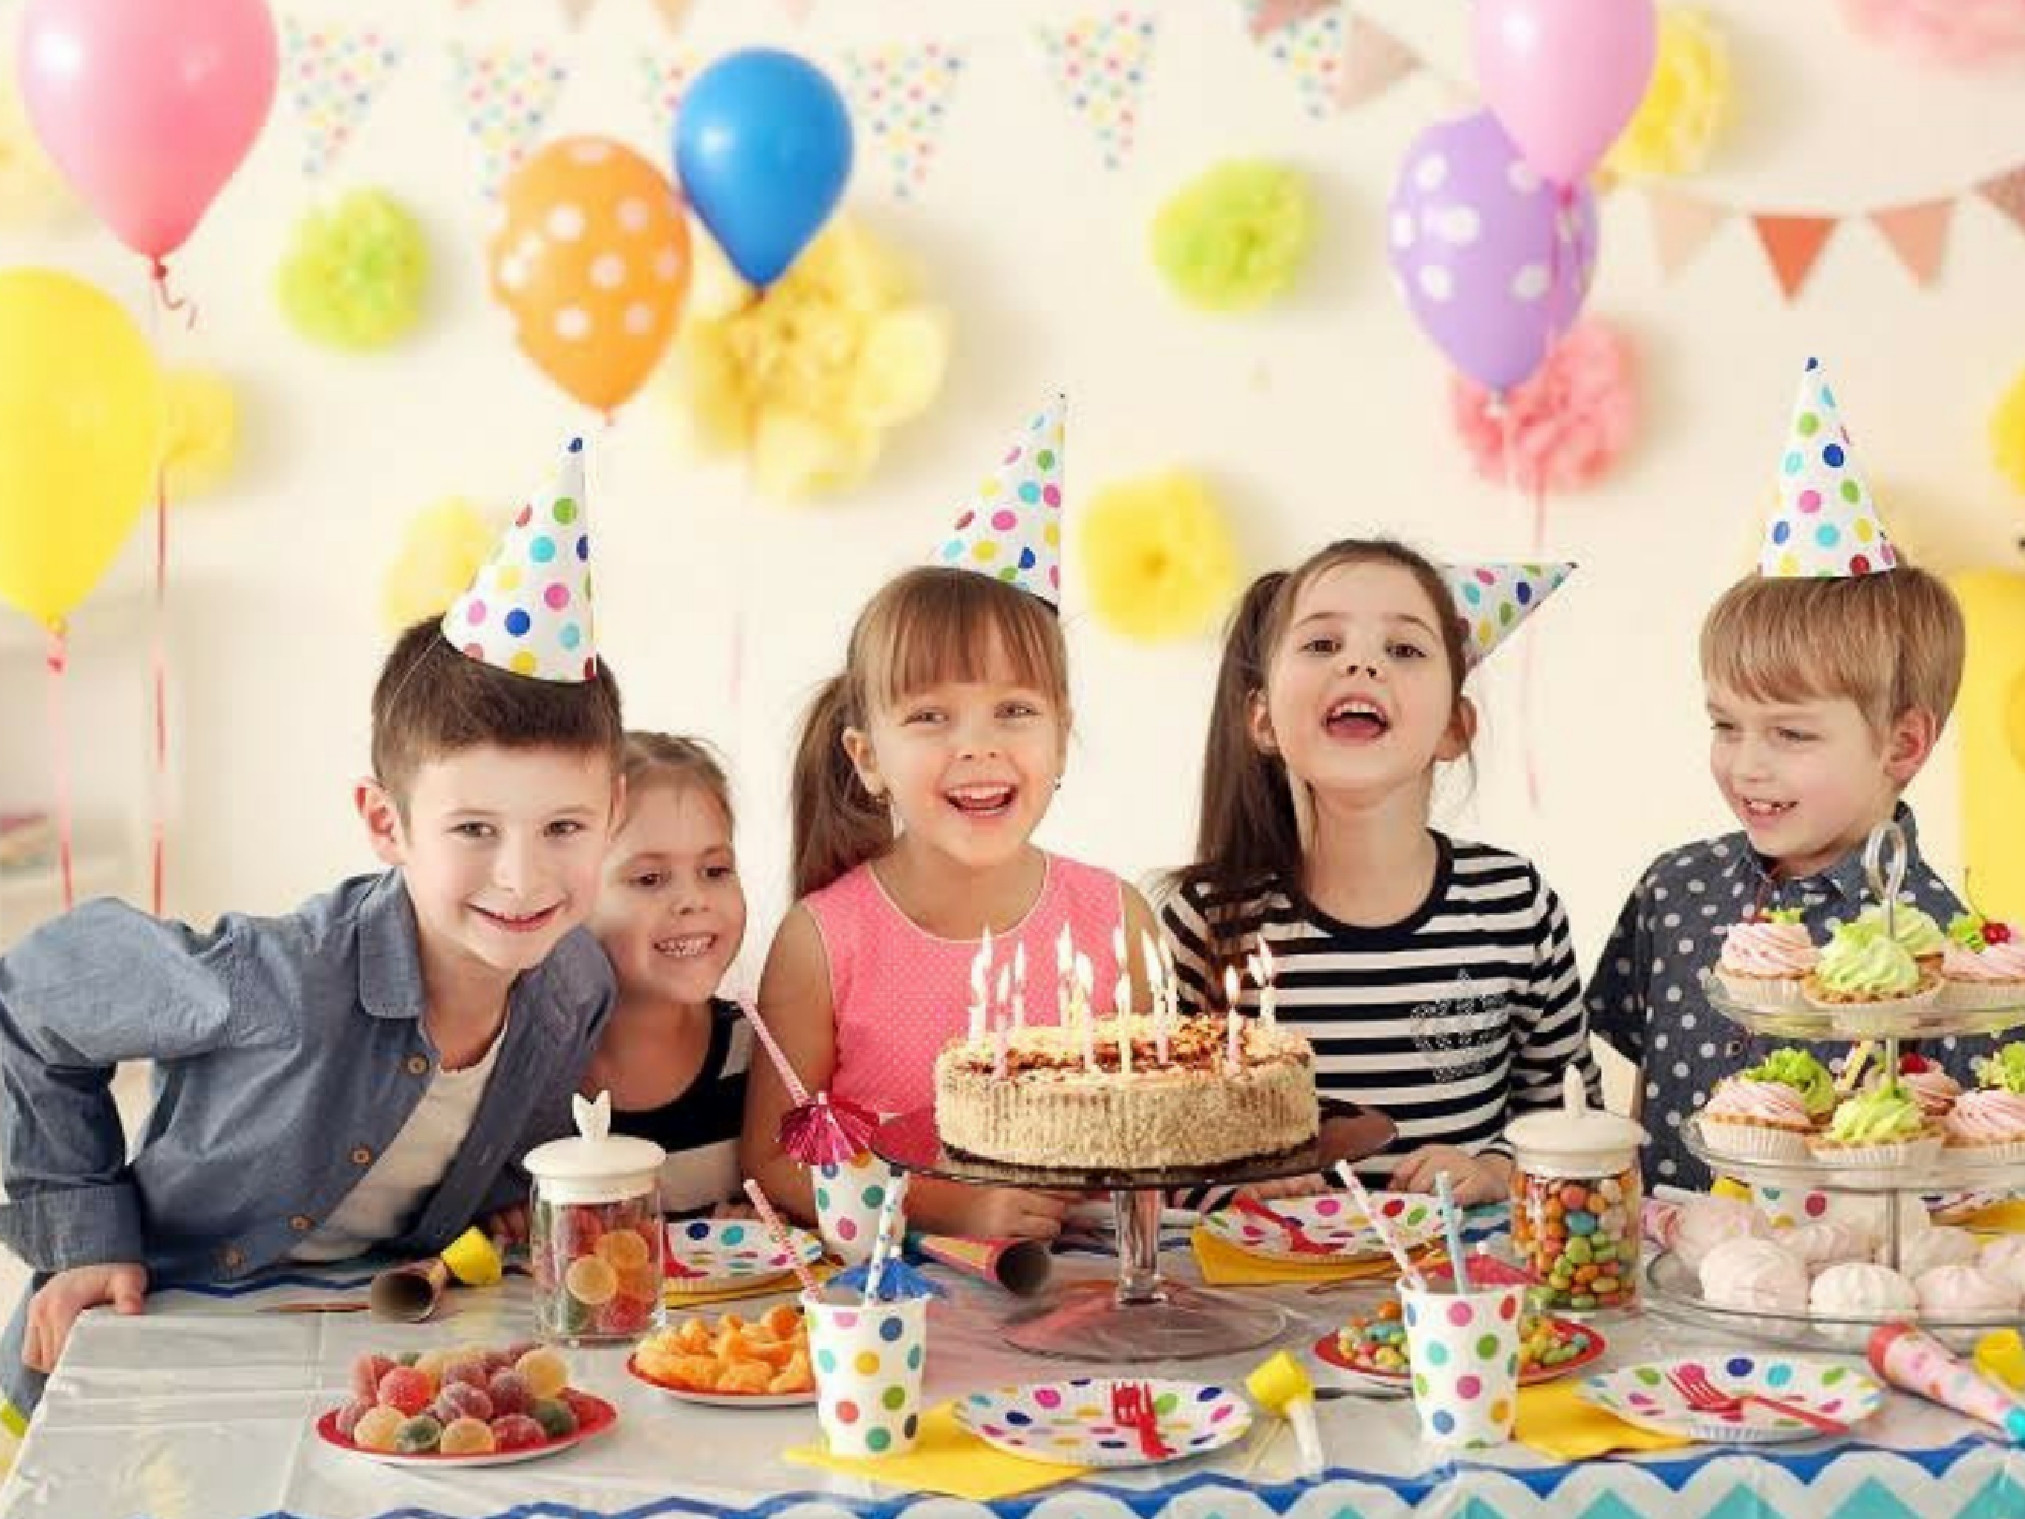 Kids Birthday Party Location Ideas
 How to Throw a Memorable Birthday Party for Your Kid